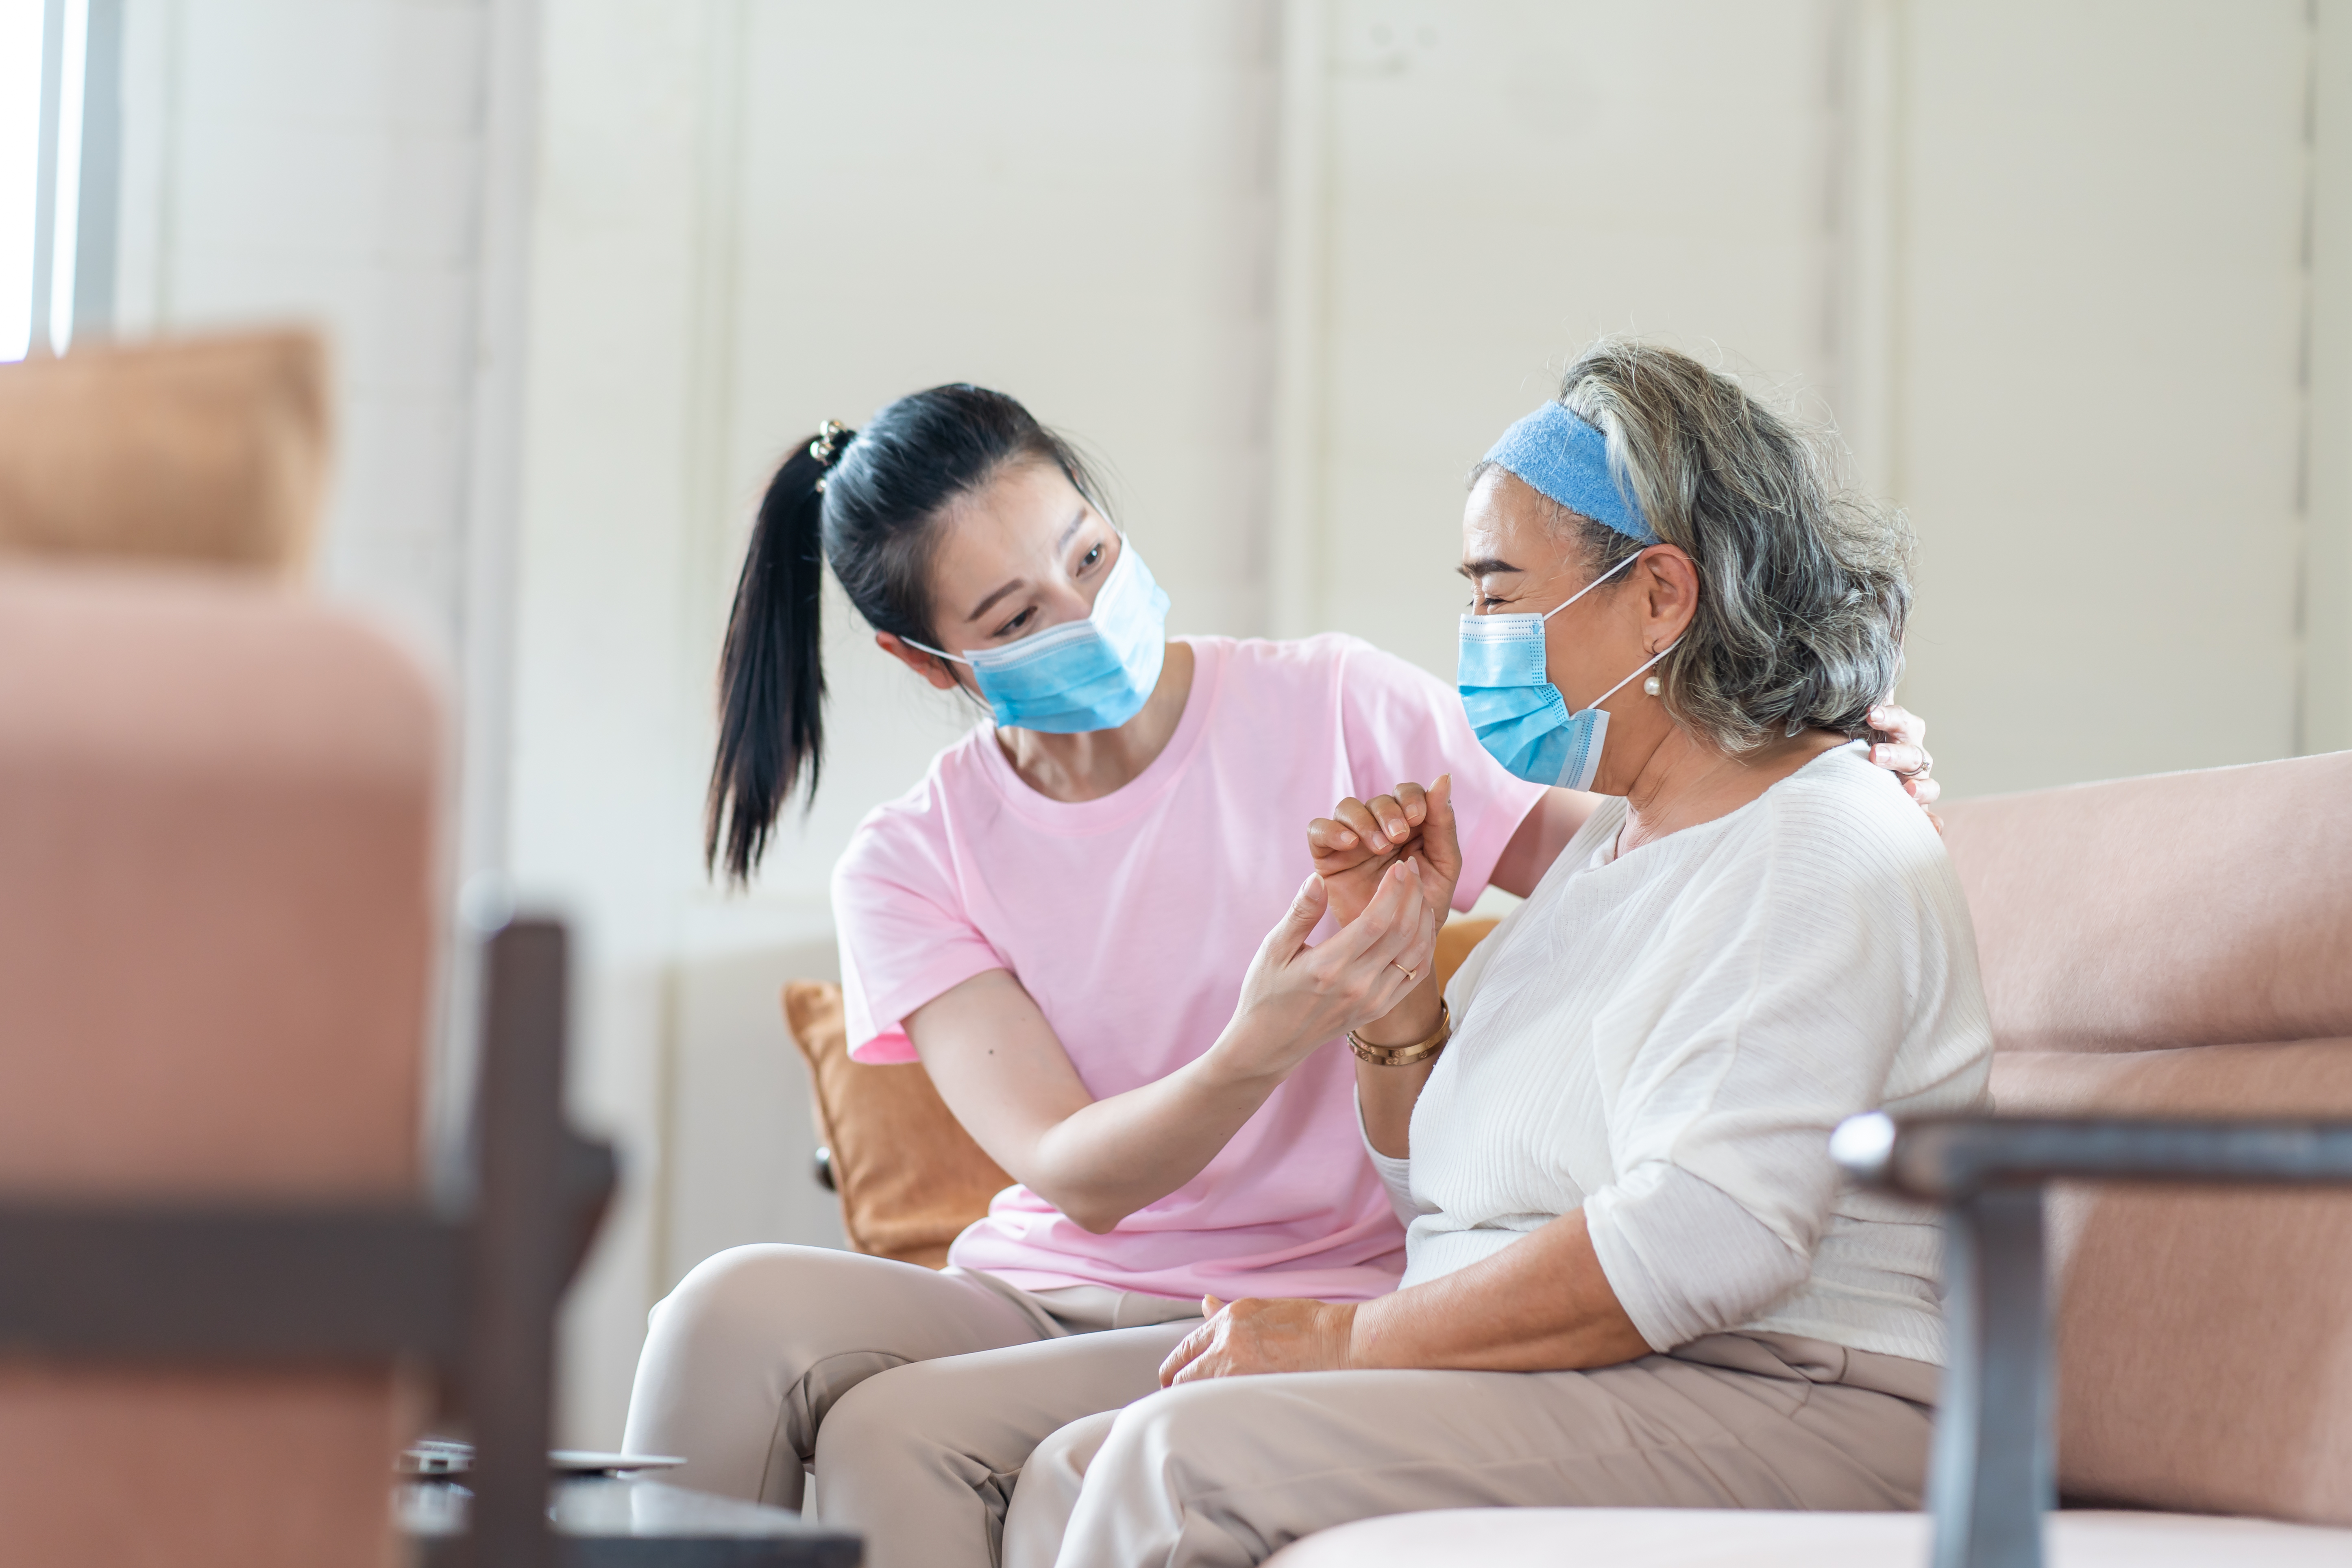 Photograph of a caregiver and client, both sitting and wearing medical masks